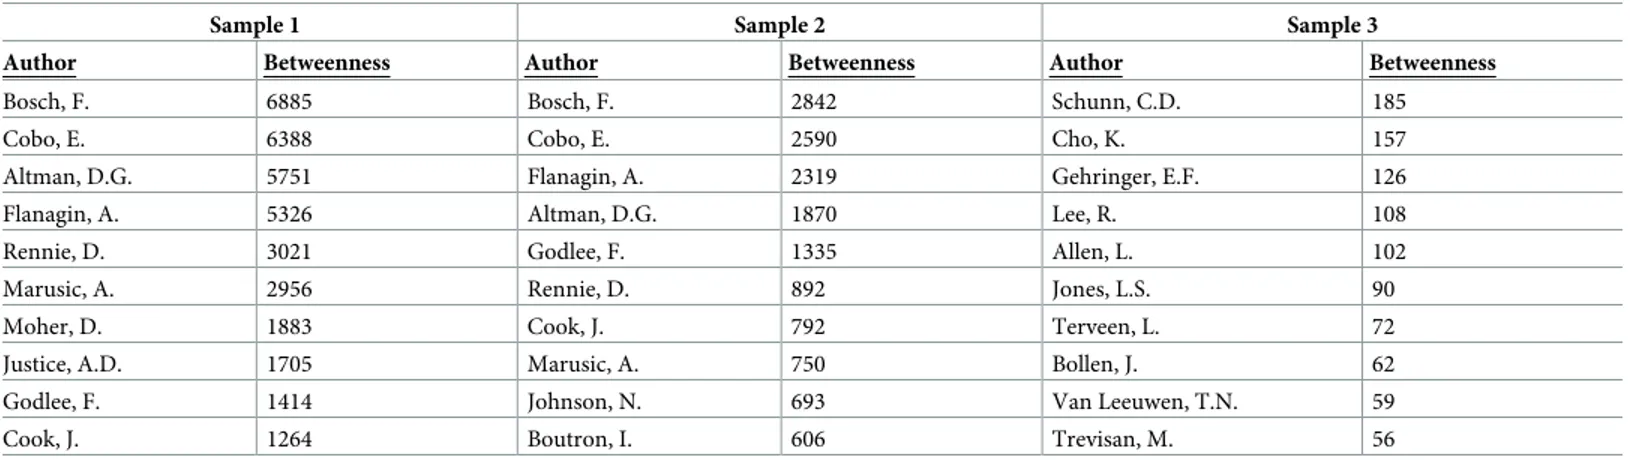 Table 1. The top 10 most central authors in the co-authorship networks (Scopus data).